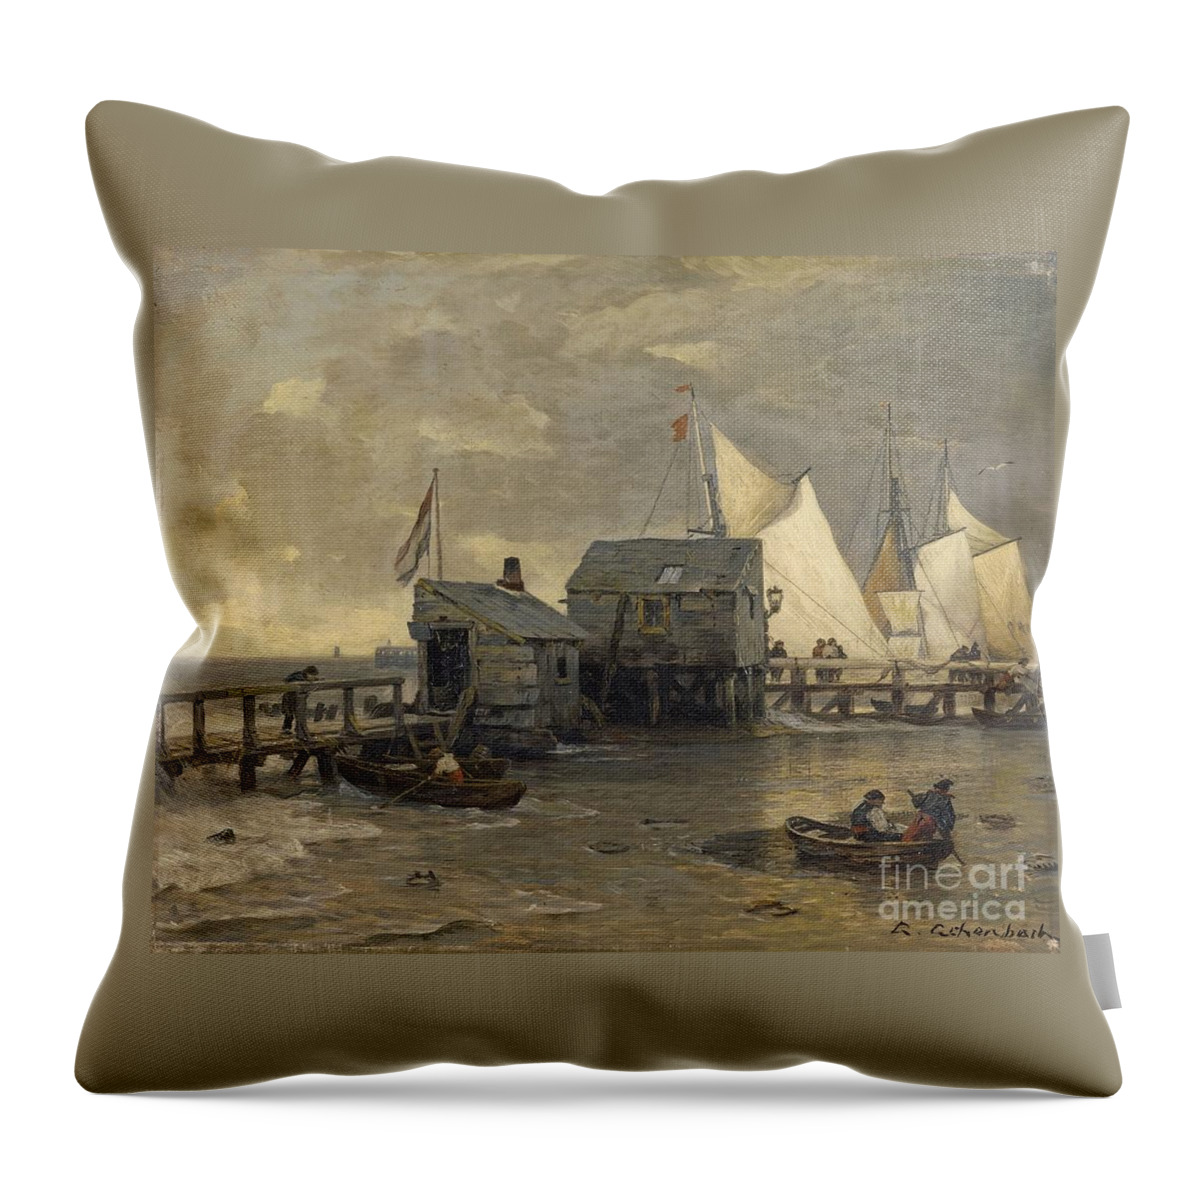 Andreas Achenbach Throw Pillow featuring the painting Landing Stage With Sailing Ships by MotionAge Designs